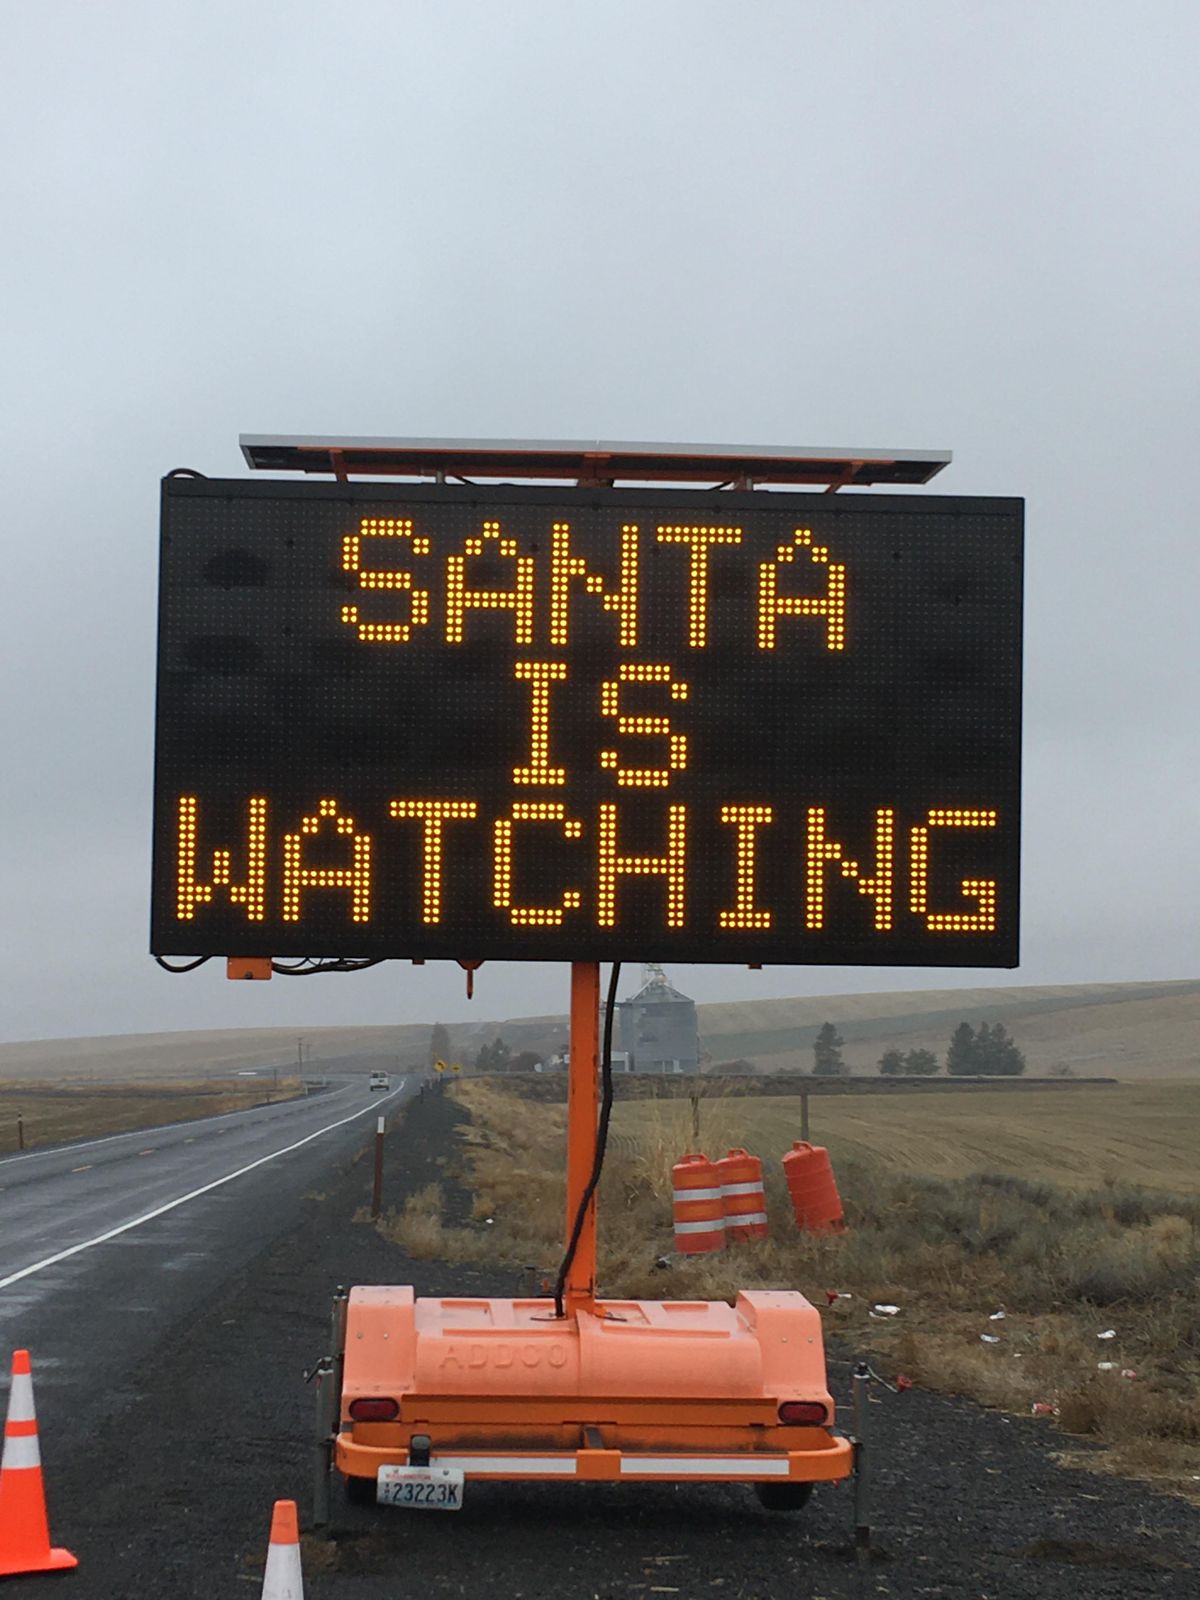 A WSDOT reader board is seen bearing a holiday message in this courtesy photograph. (WSDOT)